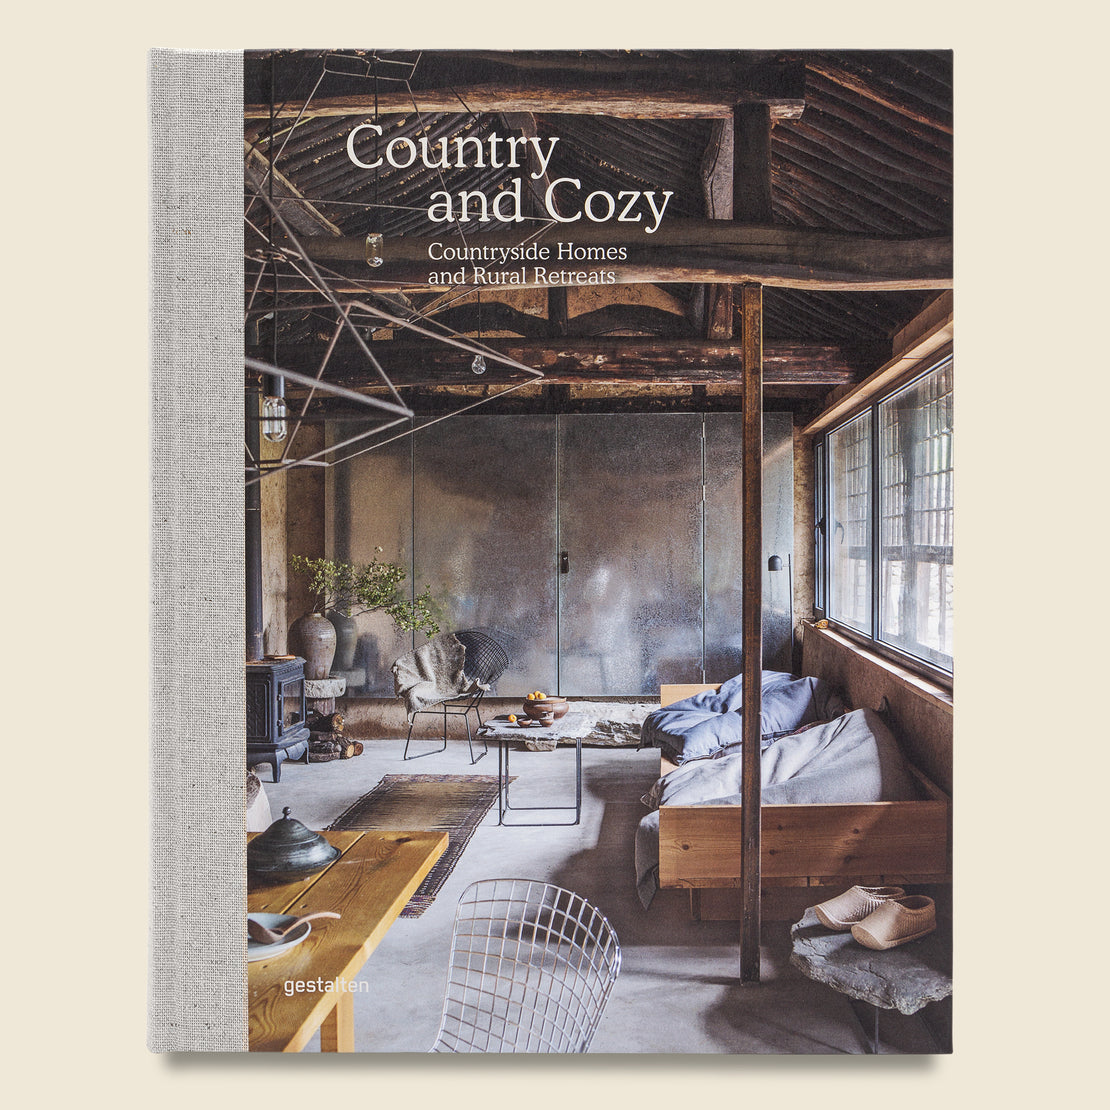 Bookstore Country and Cozy: Countryside Homes and Rural Retreats